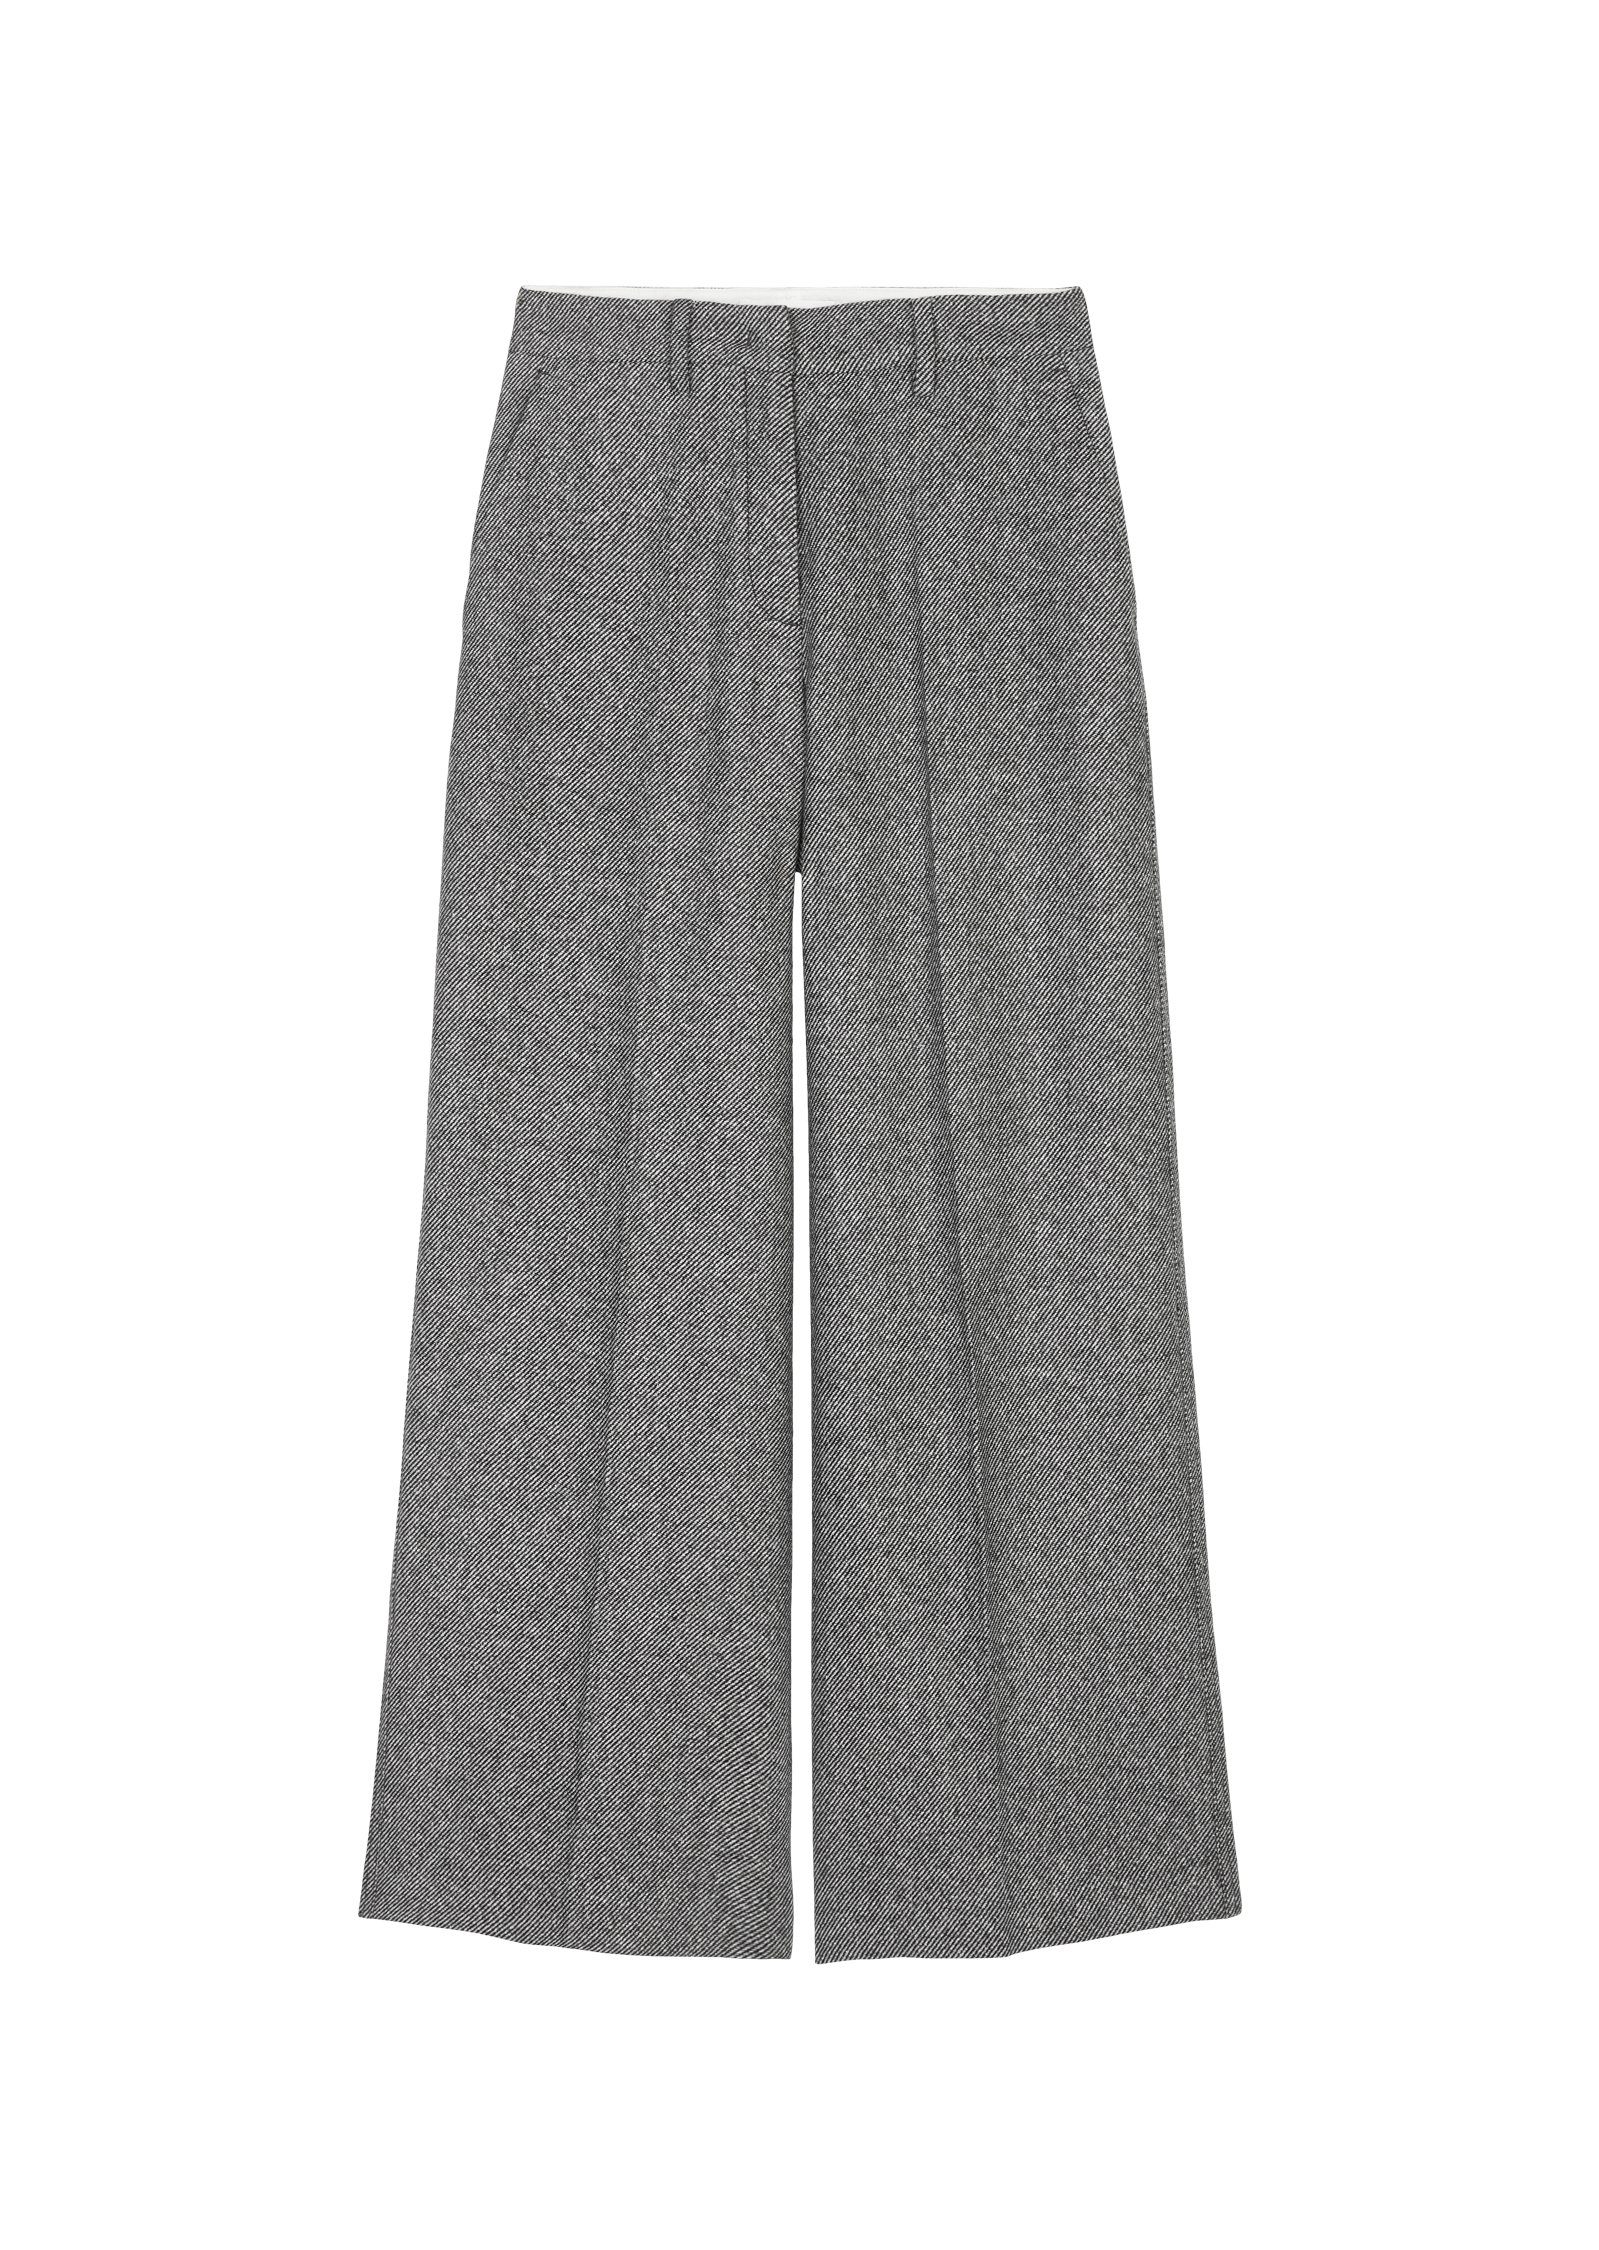 fit, style, modern Marc h suiting O'Polo Maxirock Pants,